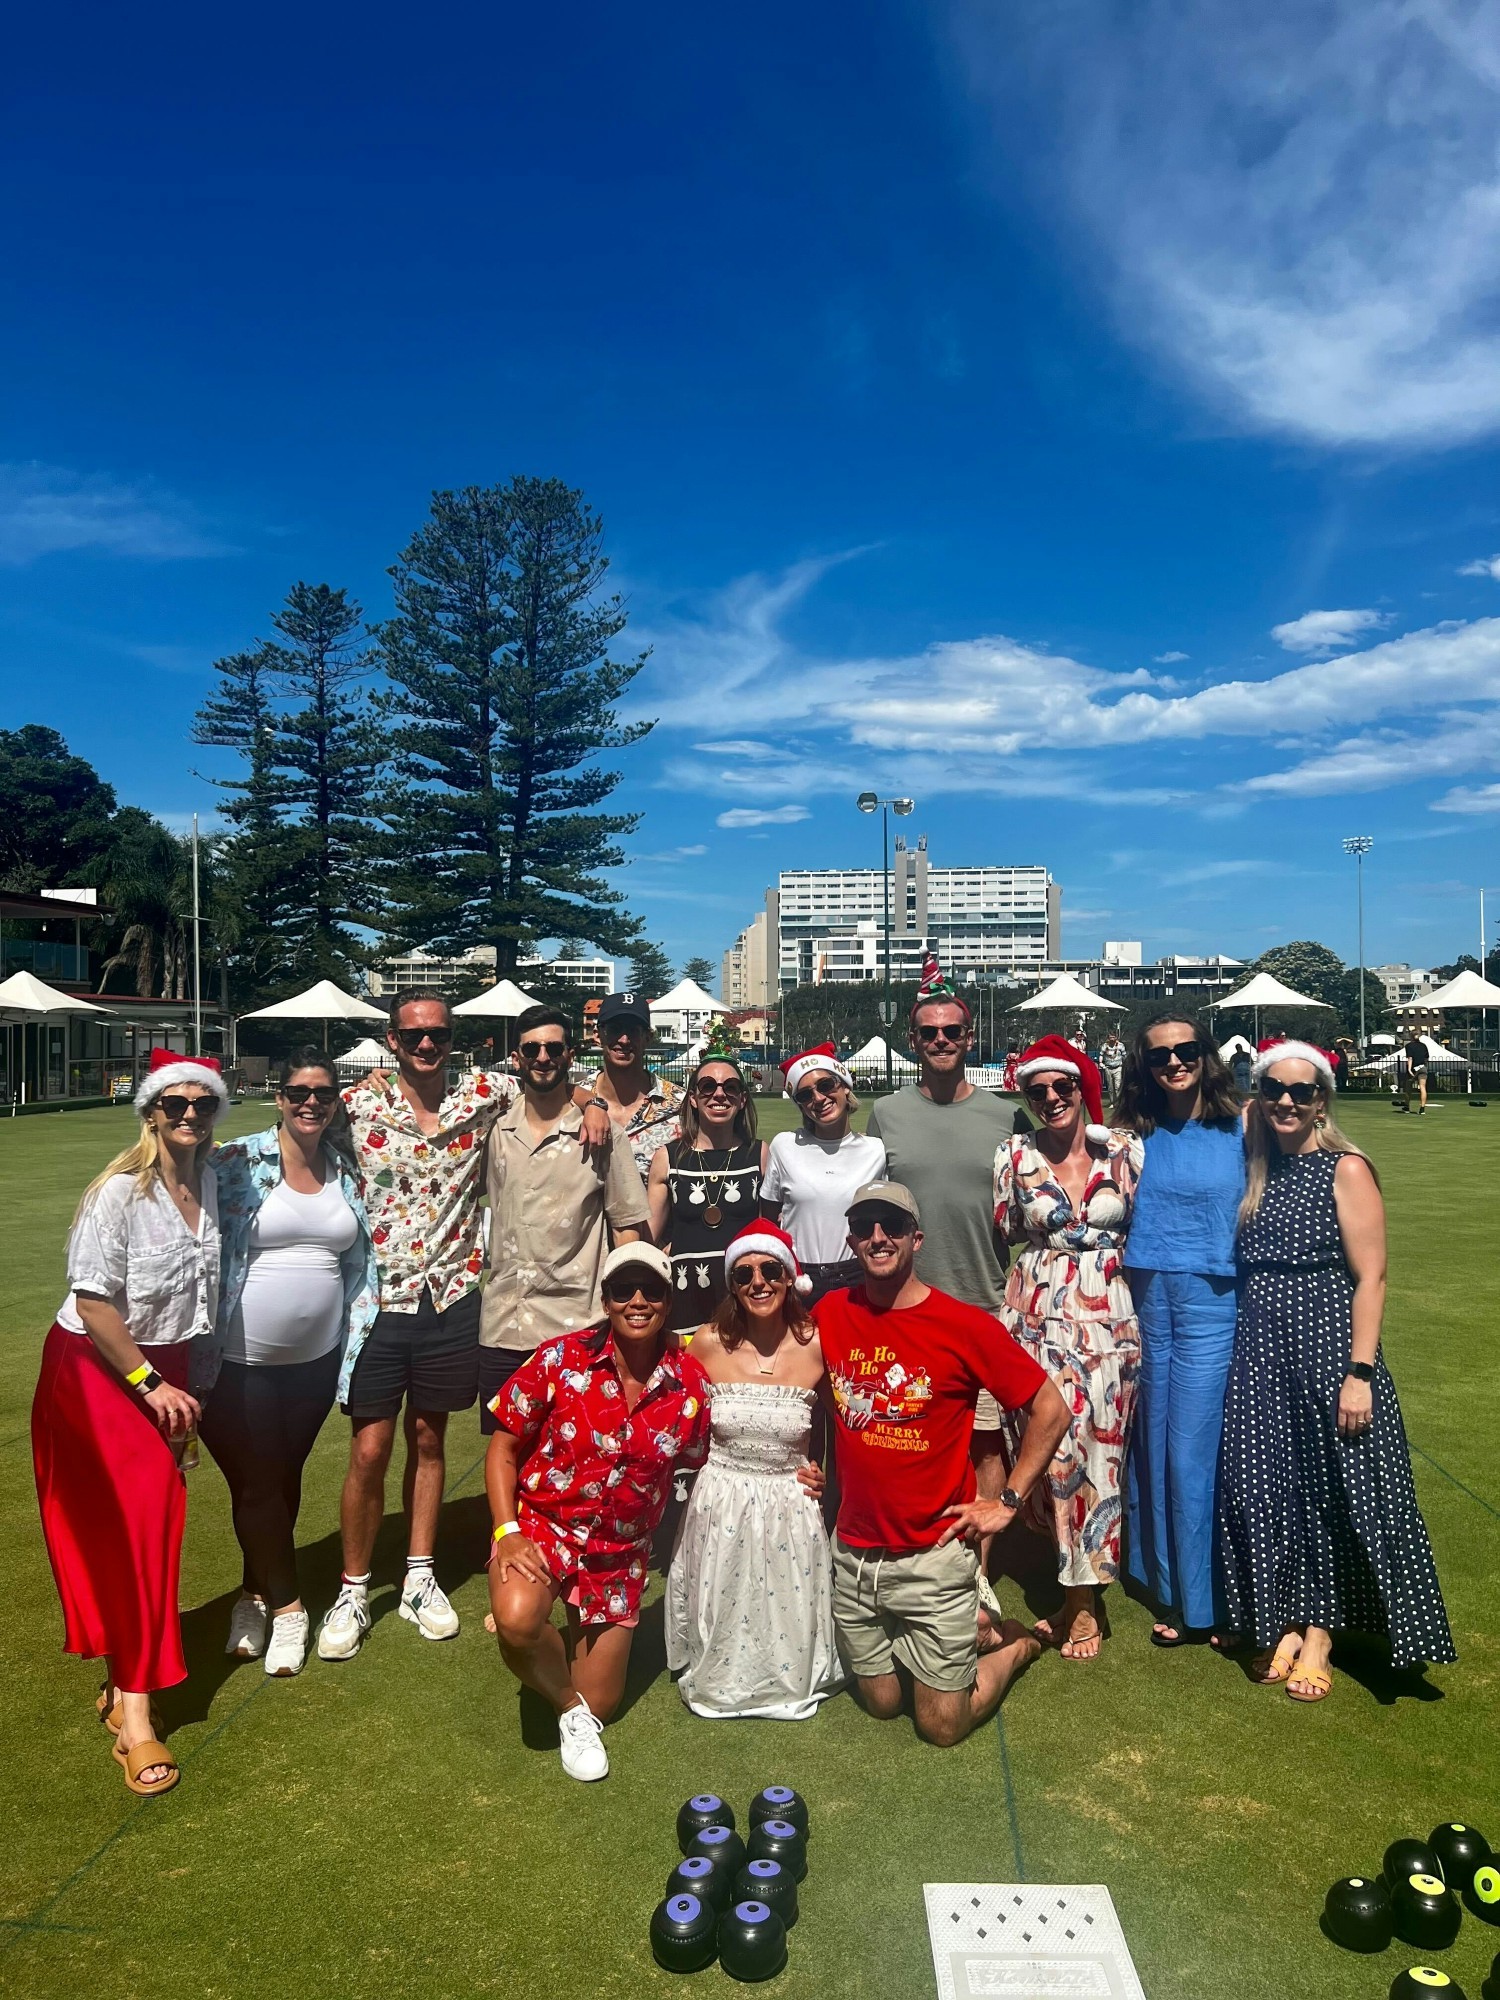 HubSpot Sydney team members enjoying a game of Lawn Bowls in the sun.